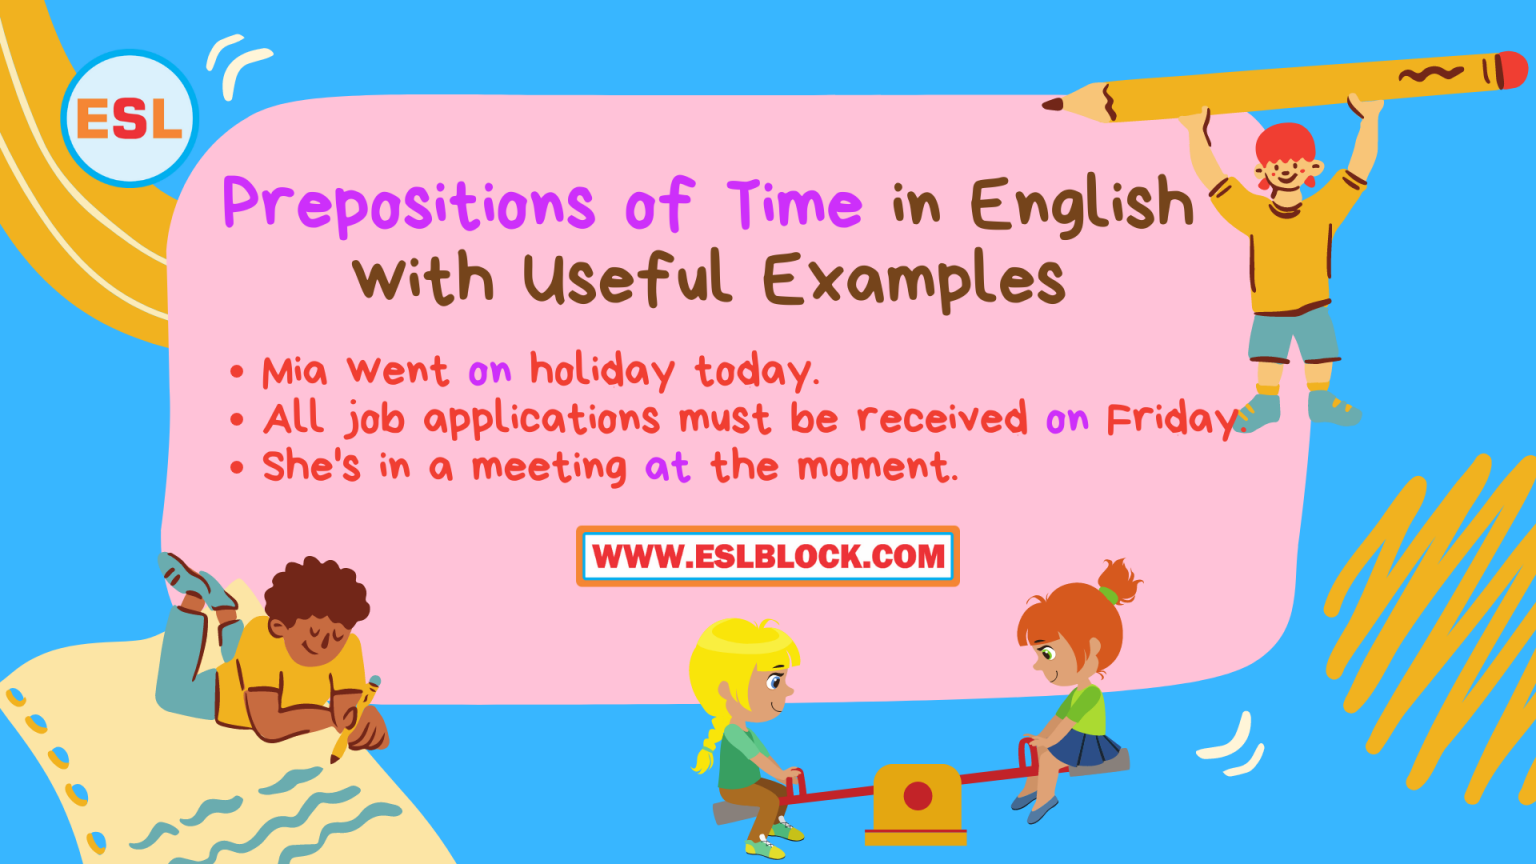 prepositions-of-time-in-english-with-useful-examples-english-as-a